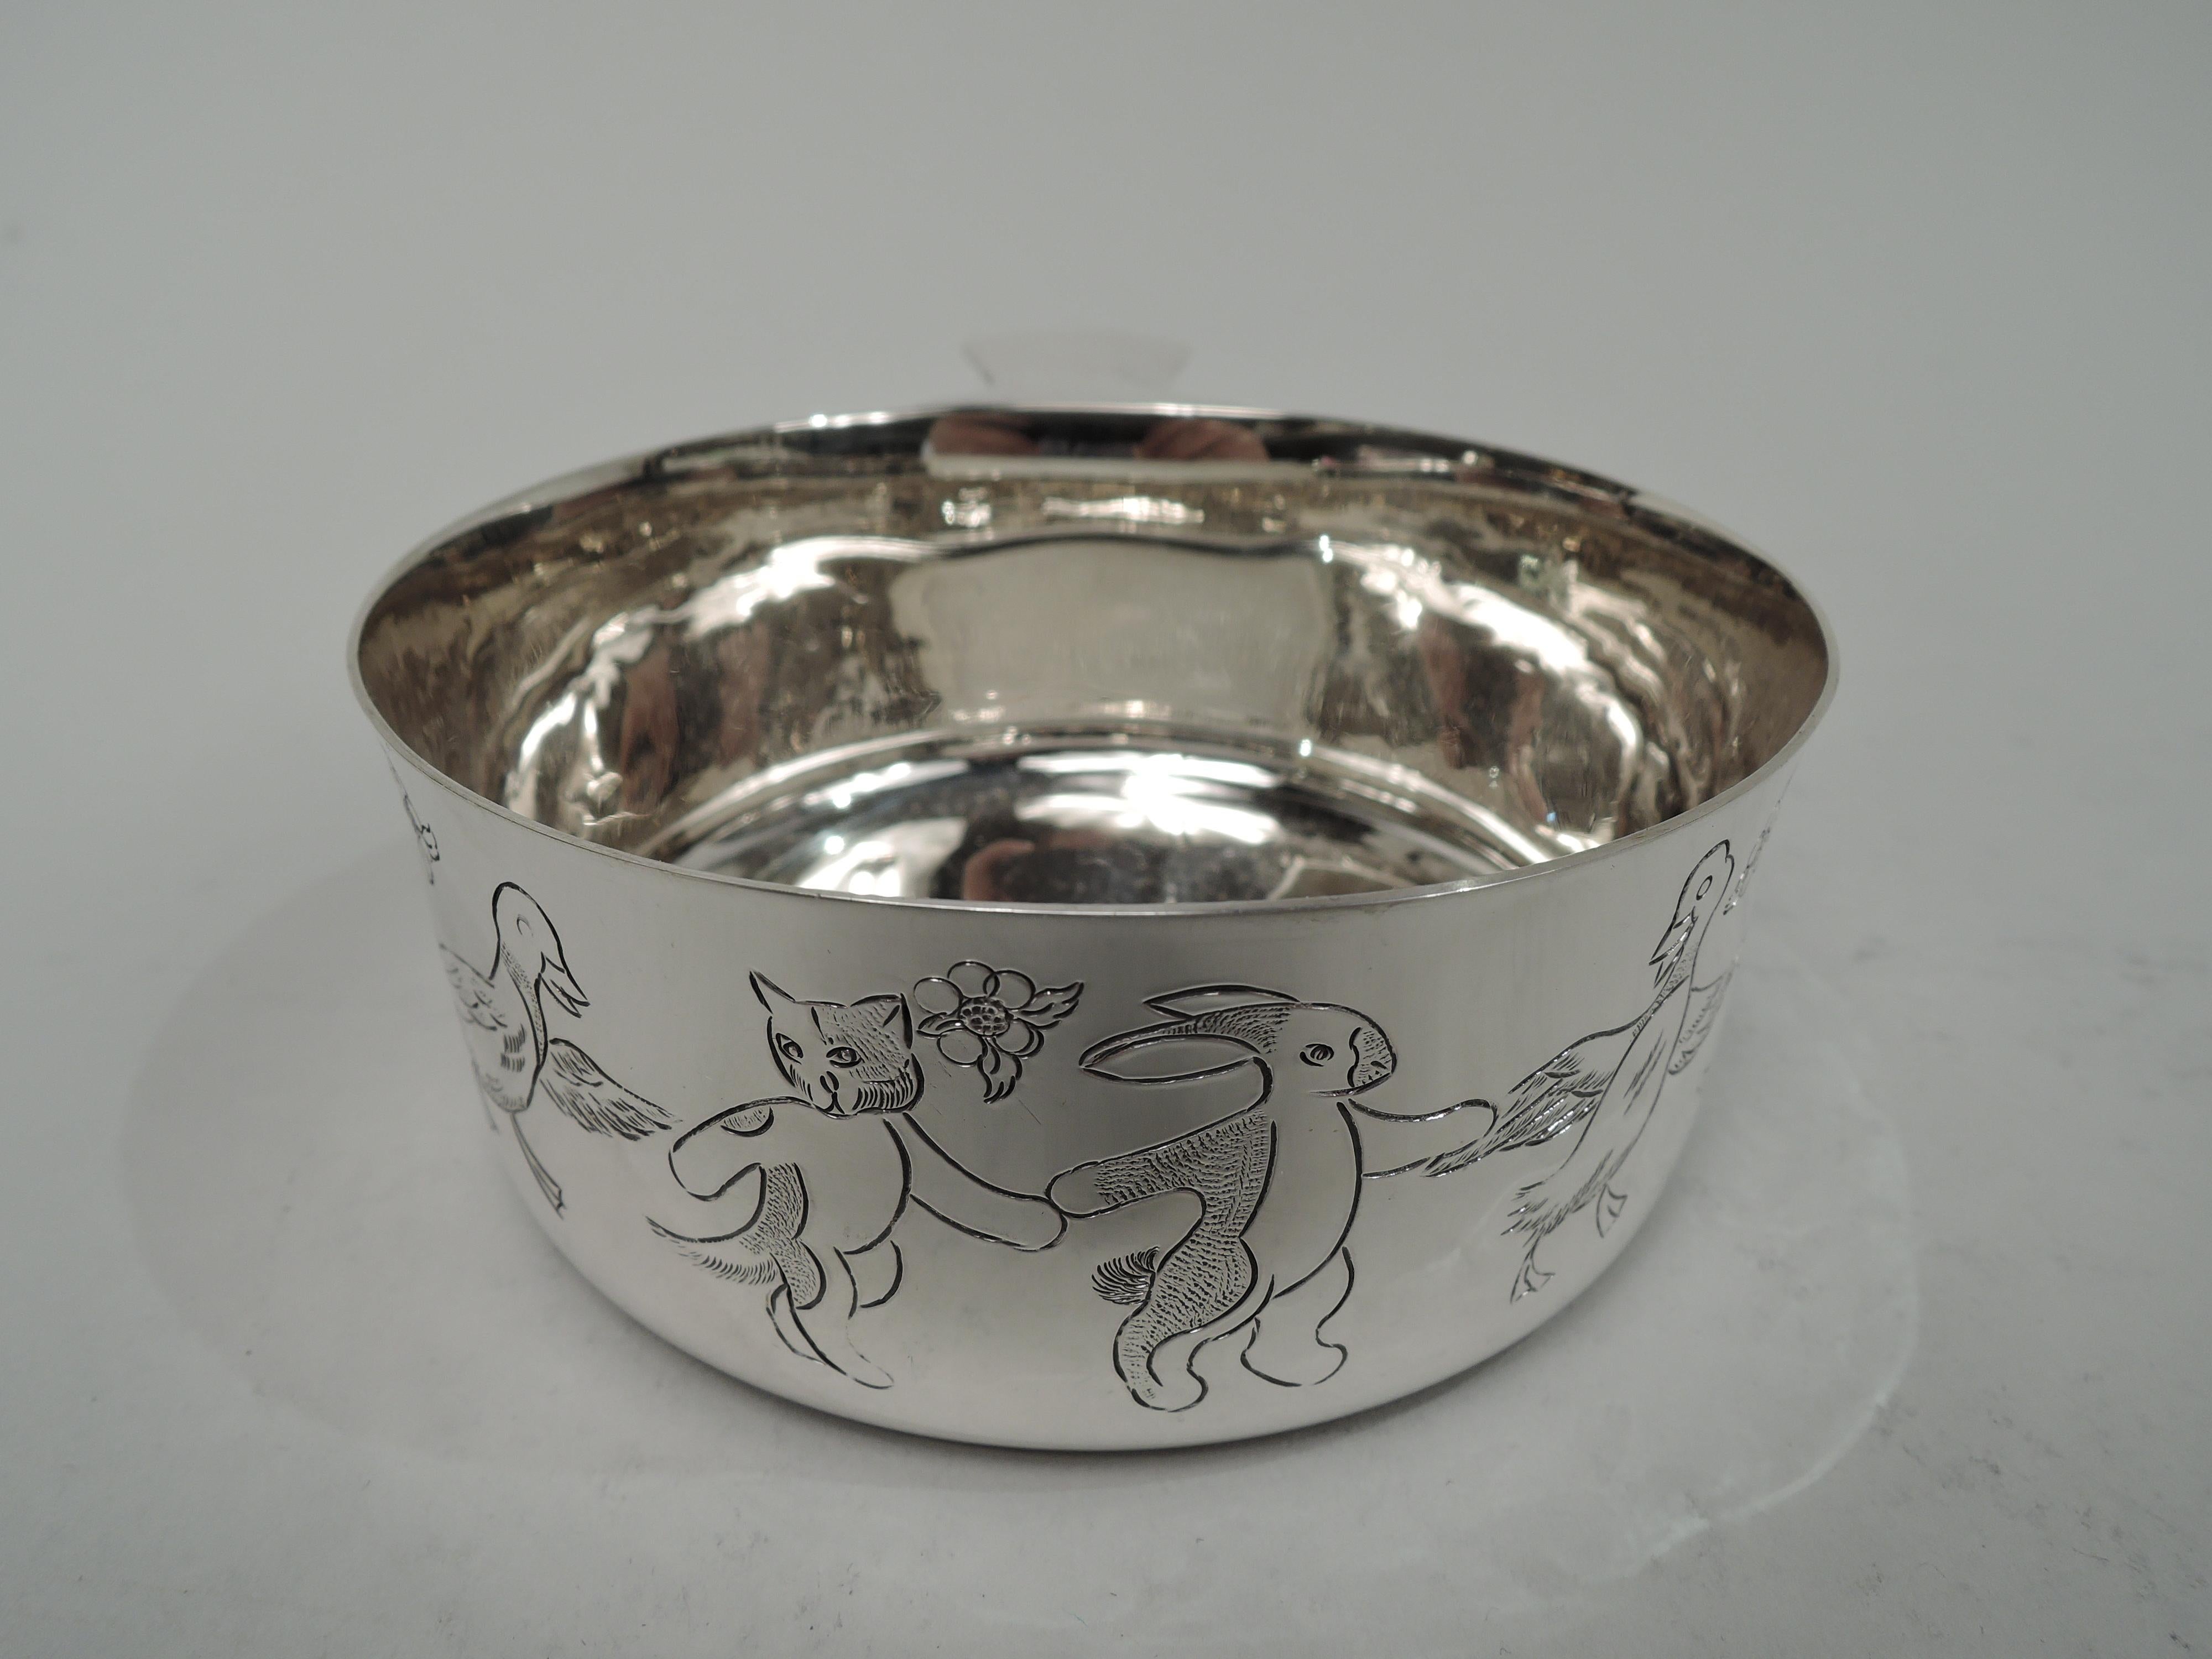 Mid-Century Modern sterling silver porringer. Made by Tiffany & Co. in New York. Round with straight sides, flared rim, and chamfered and tapering solid handle. Frieze with birds, bunnies, and kitties dancing paw in wing. Fully marked including